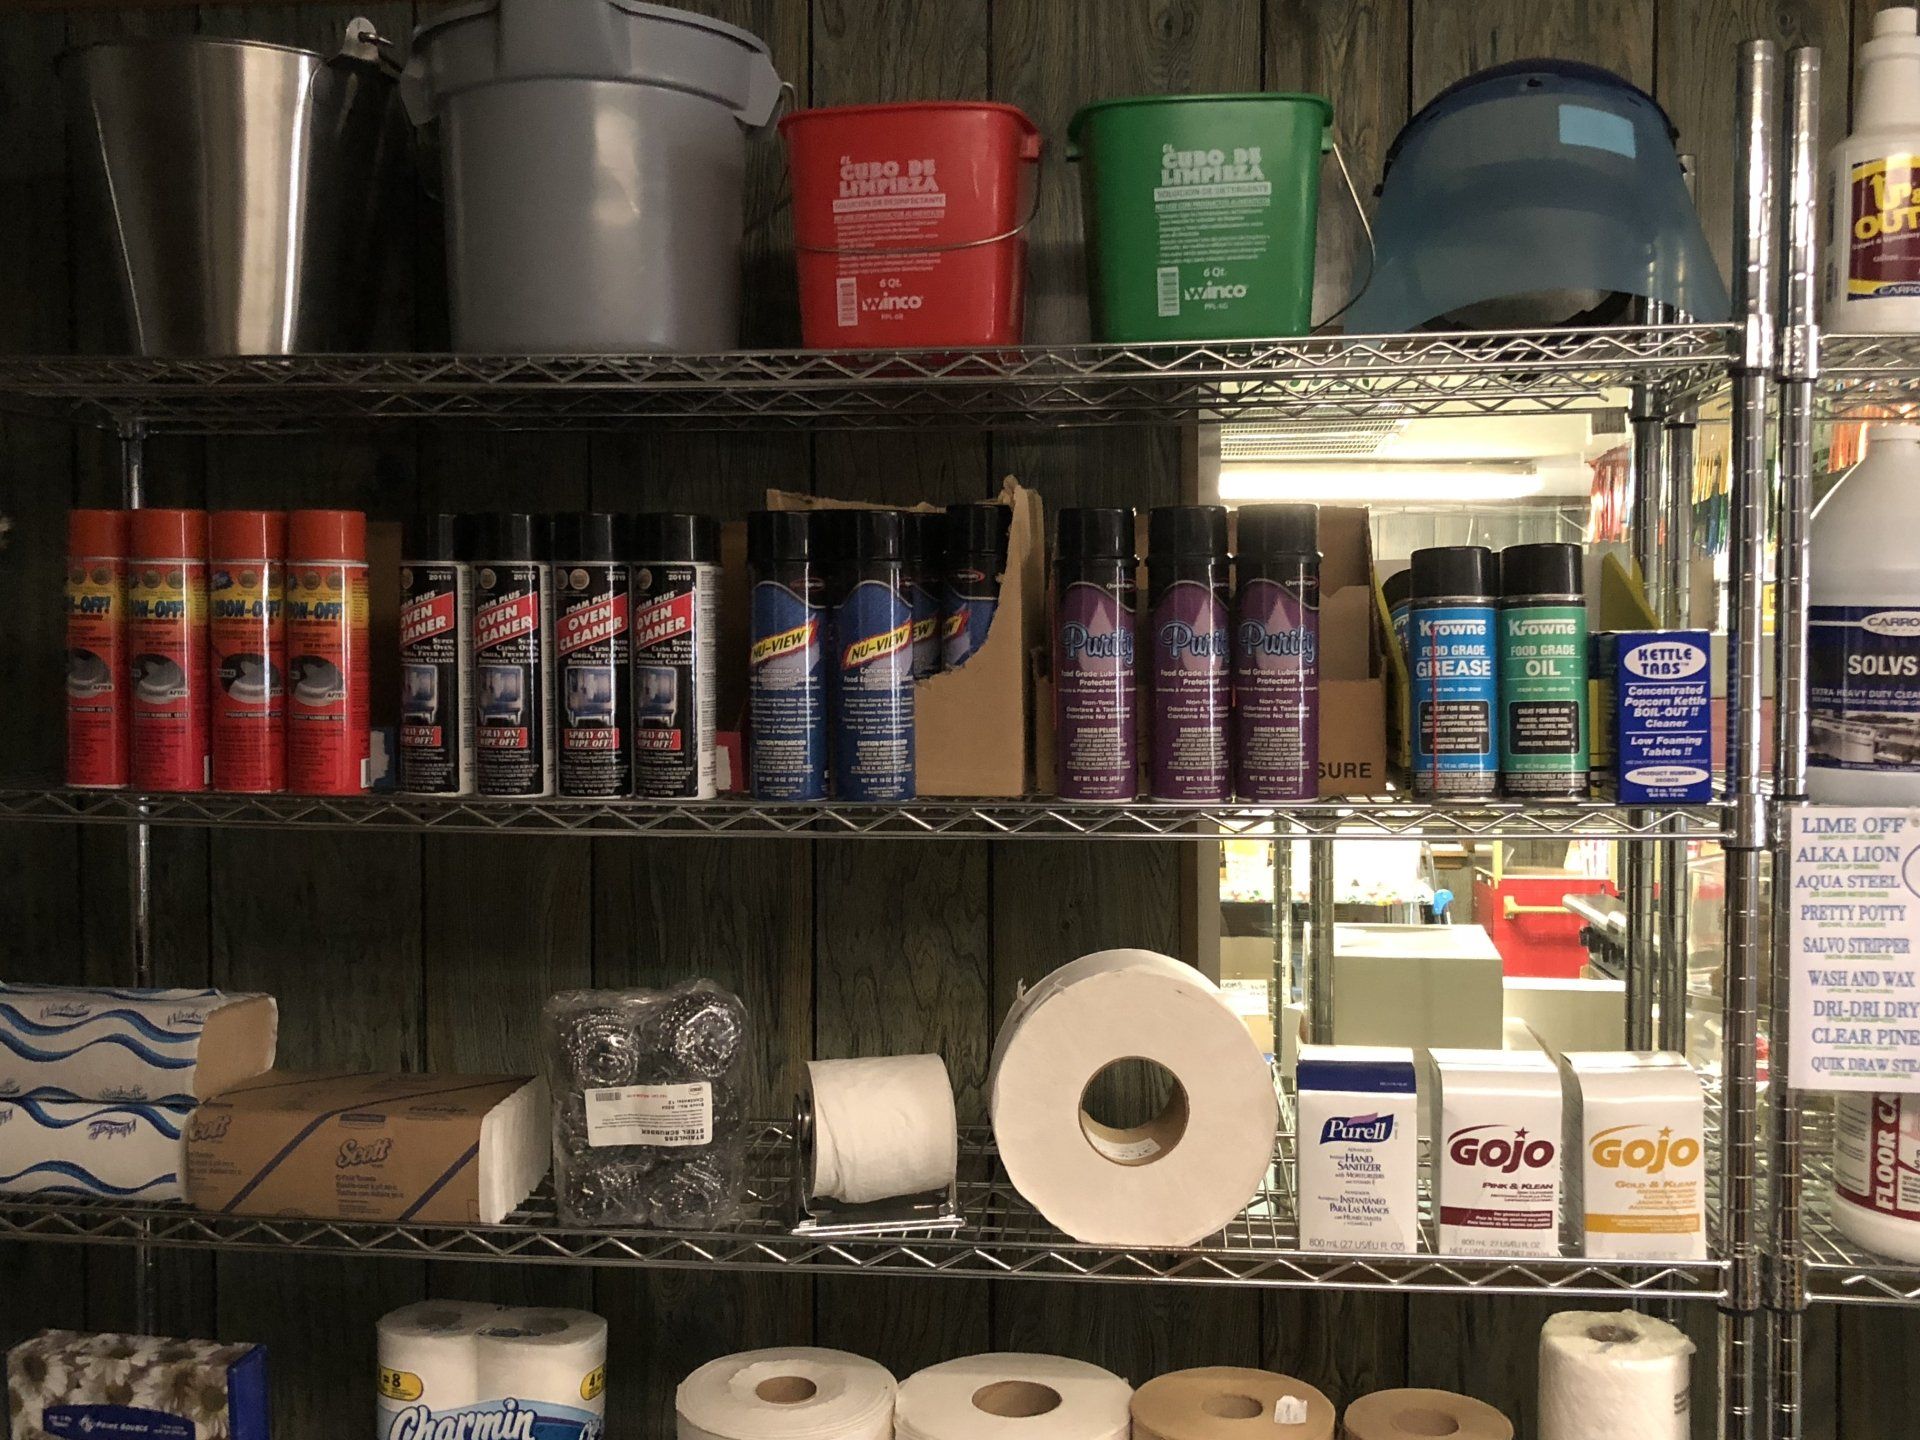 A shelf full of cleaning supplies including spray bottles and toilet paper